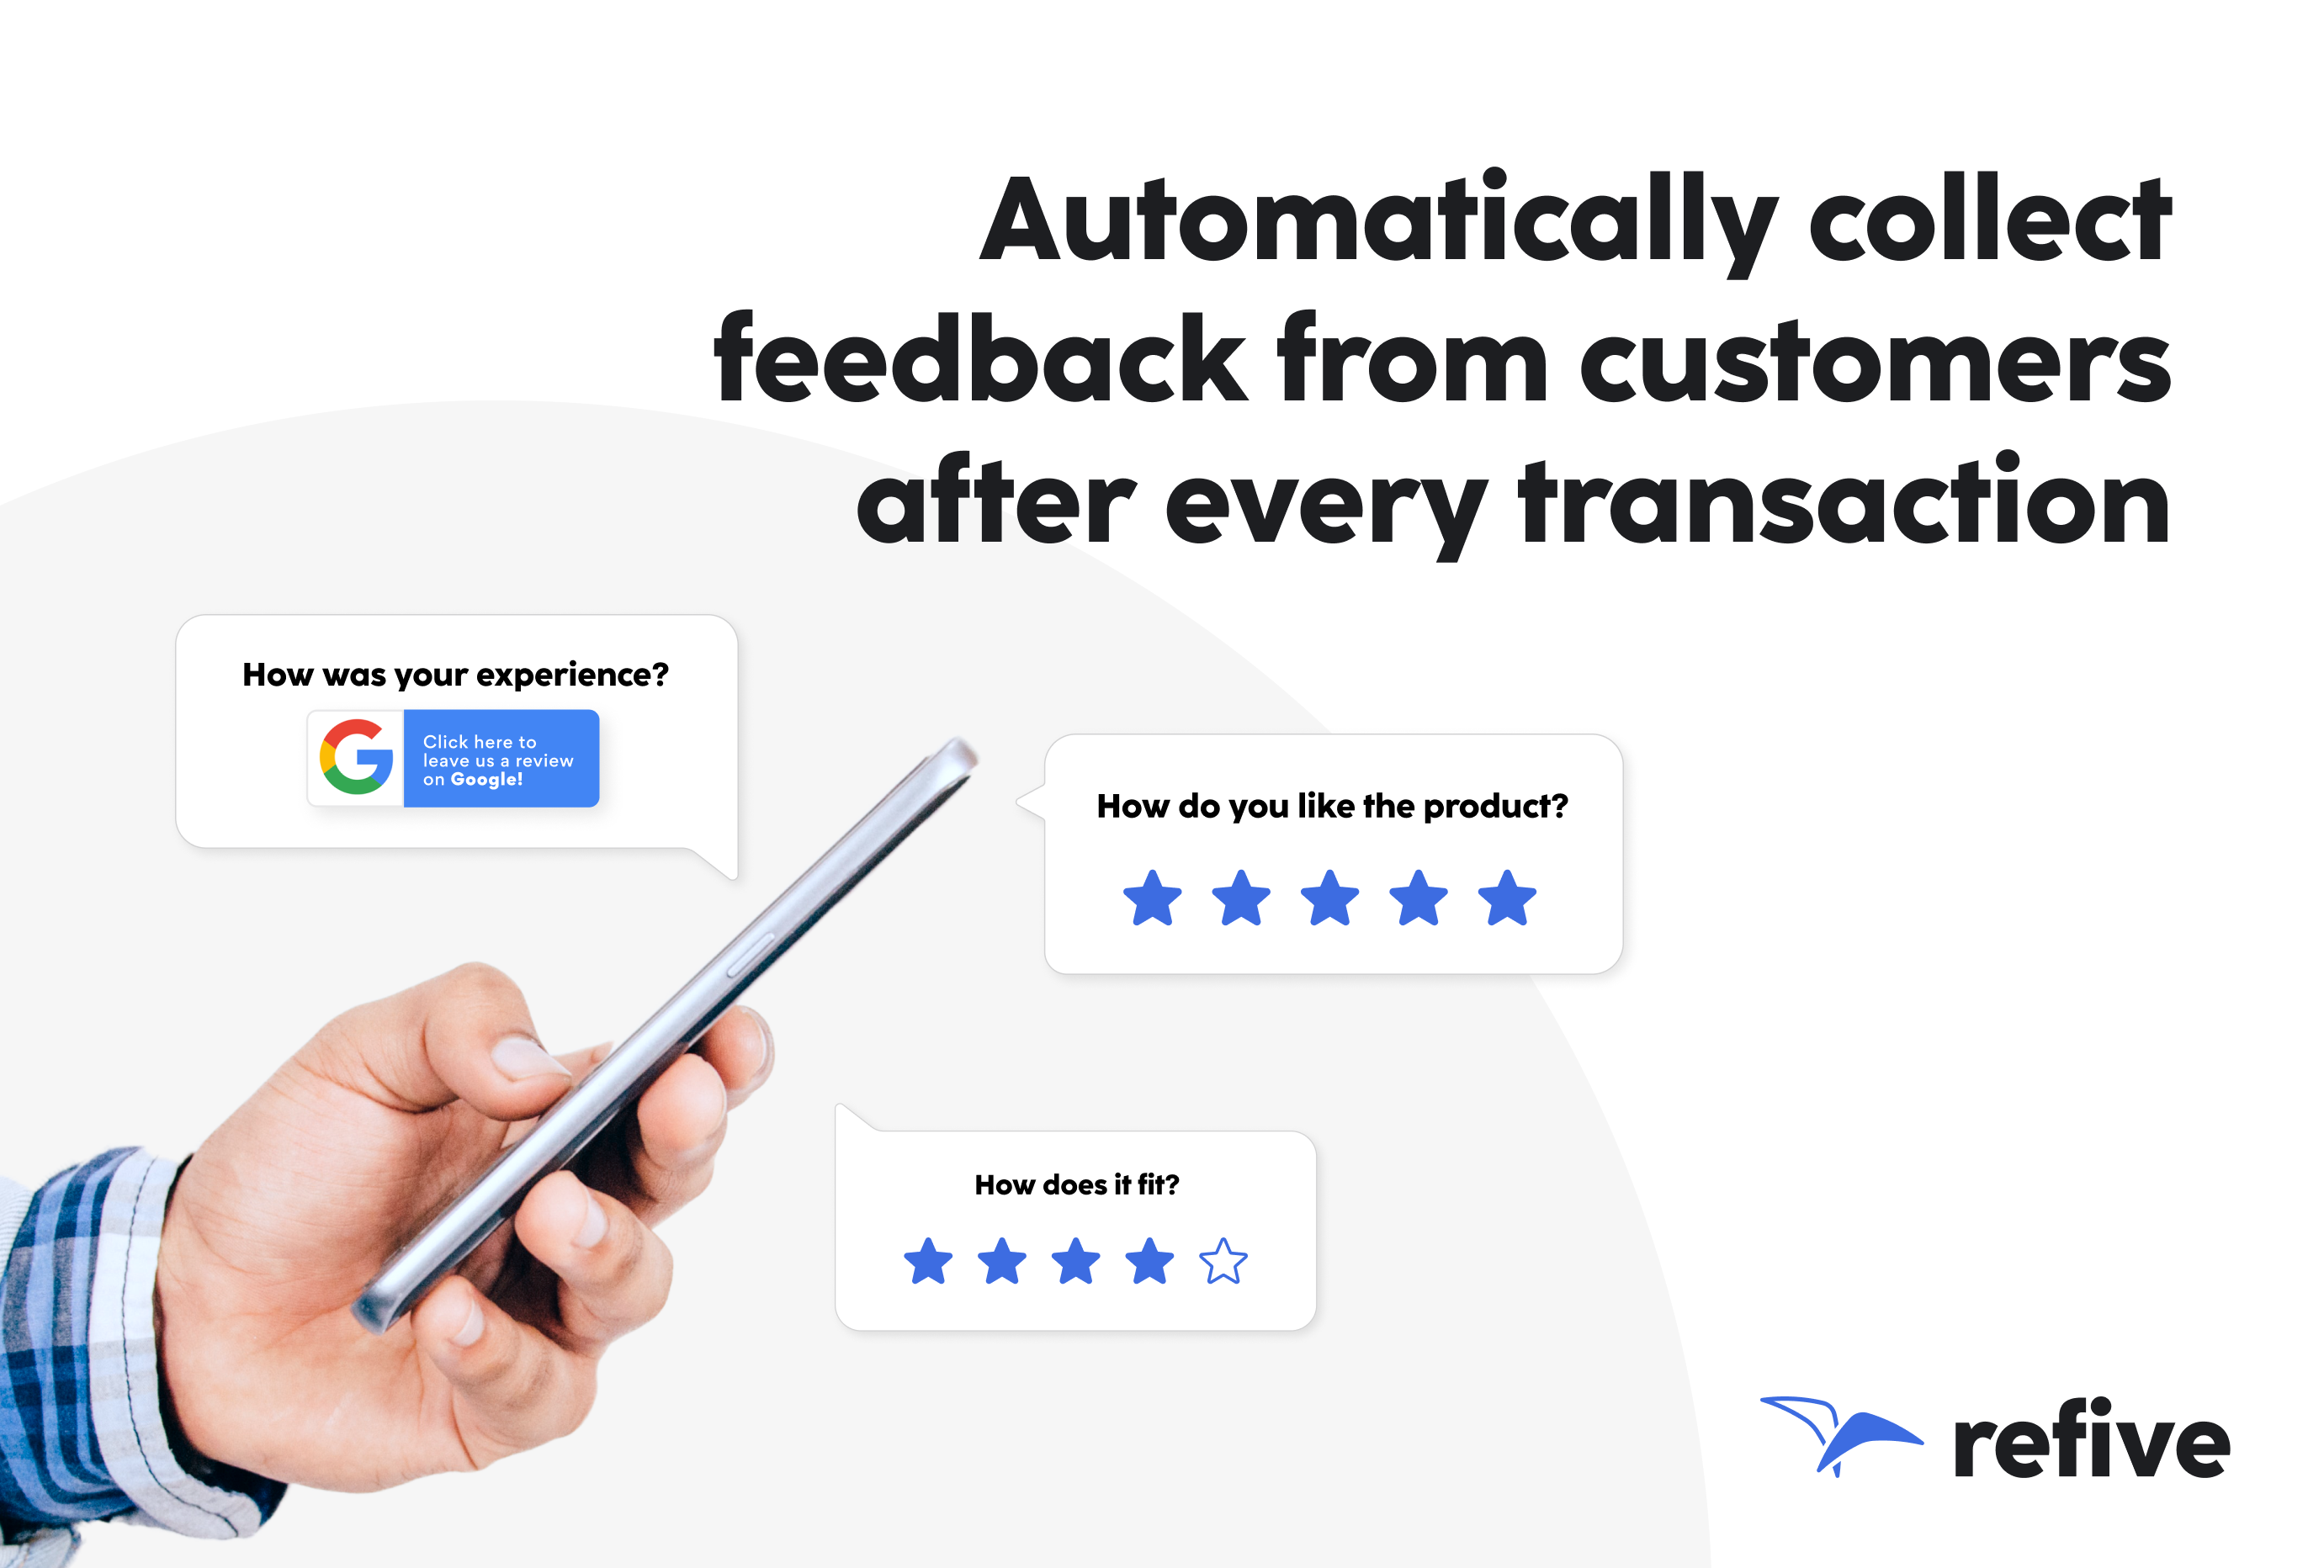 Automatically collect feedback from customers via digital receipts